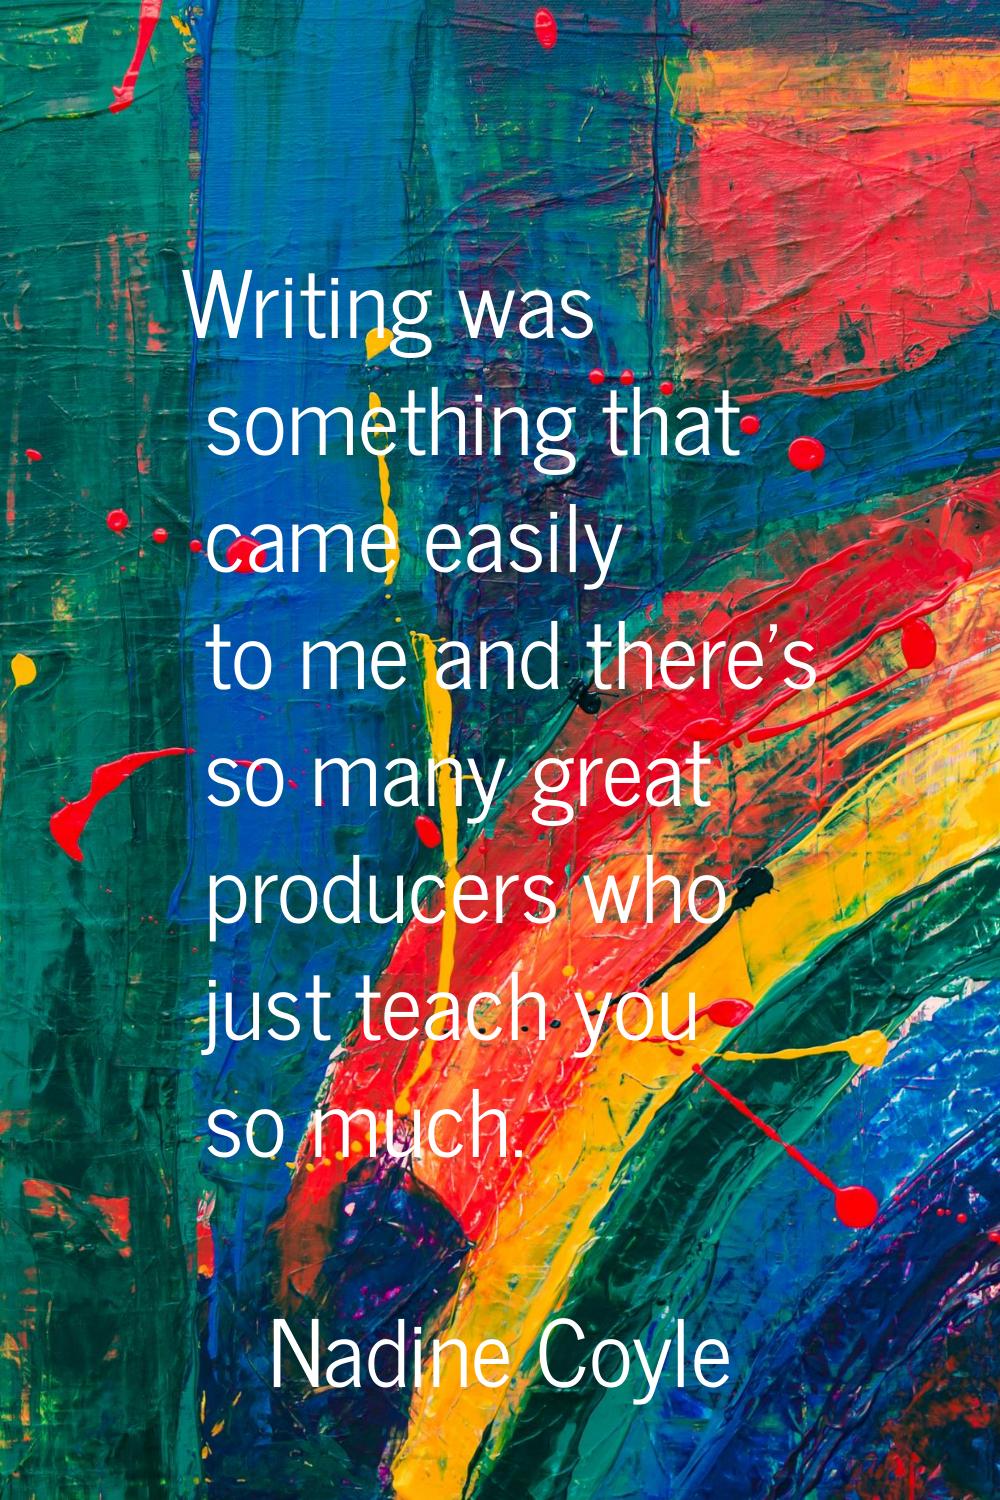 Writing was something that came easily to me and there's so many great producers who just teach you